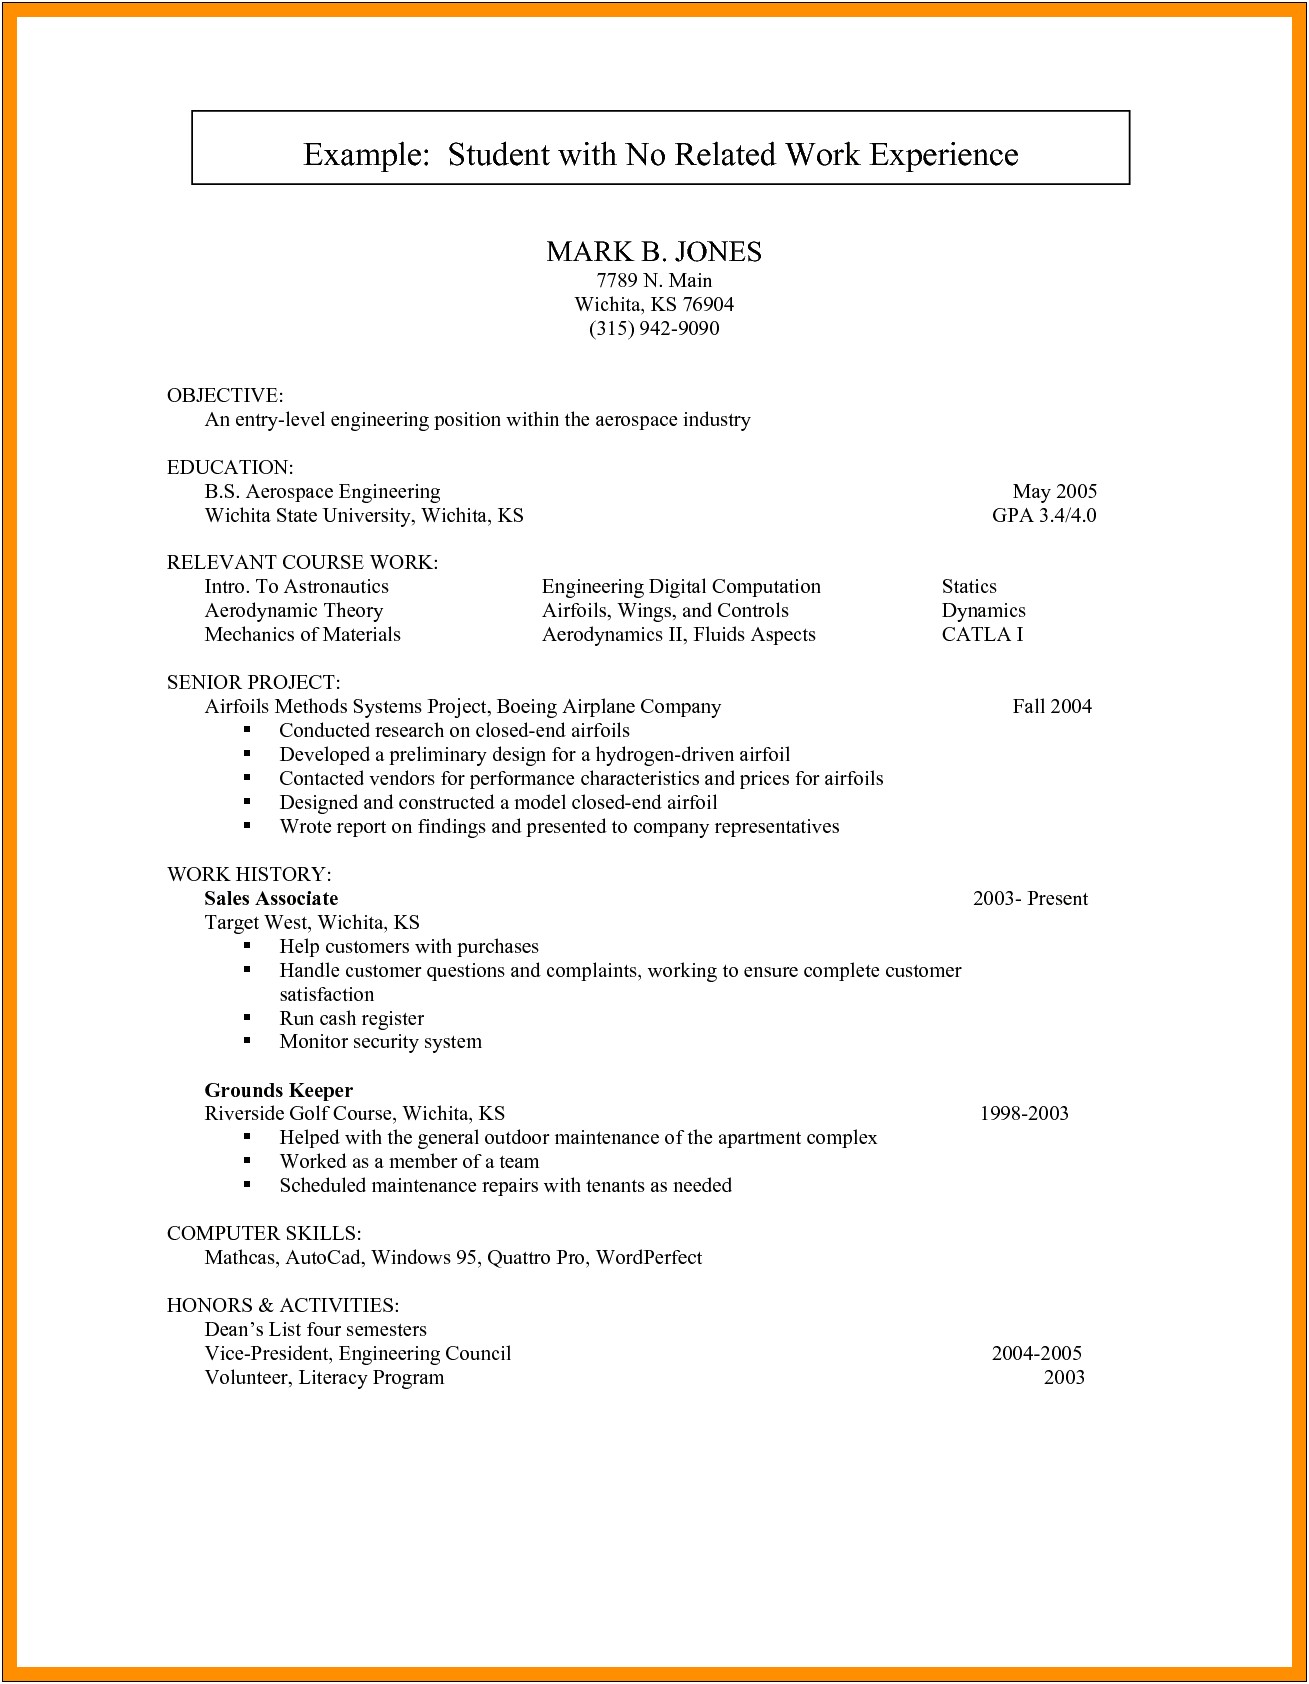 Resume With No Work Experience Example College